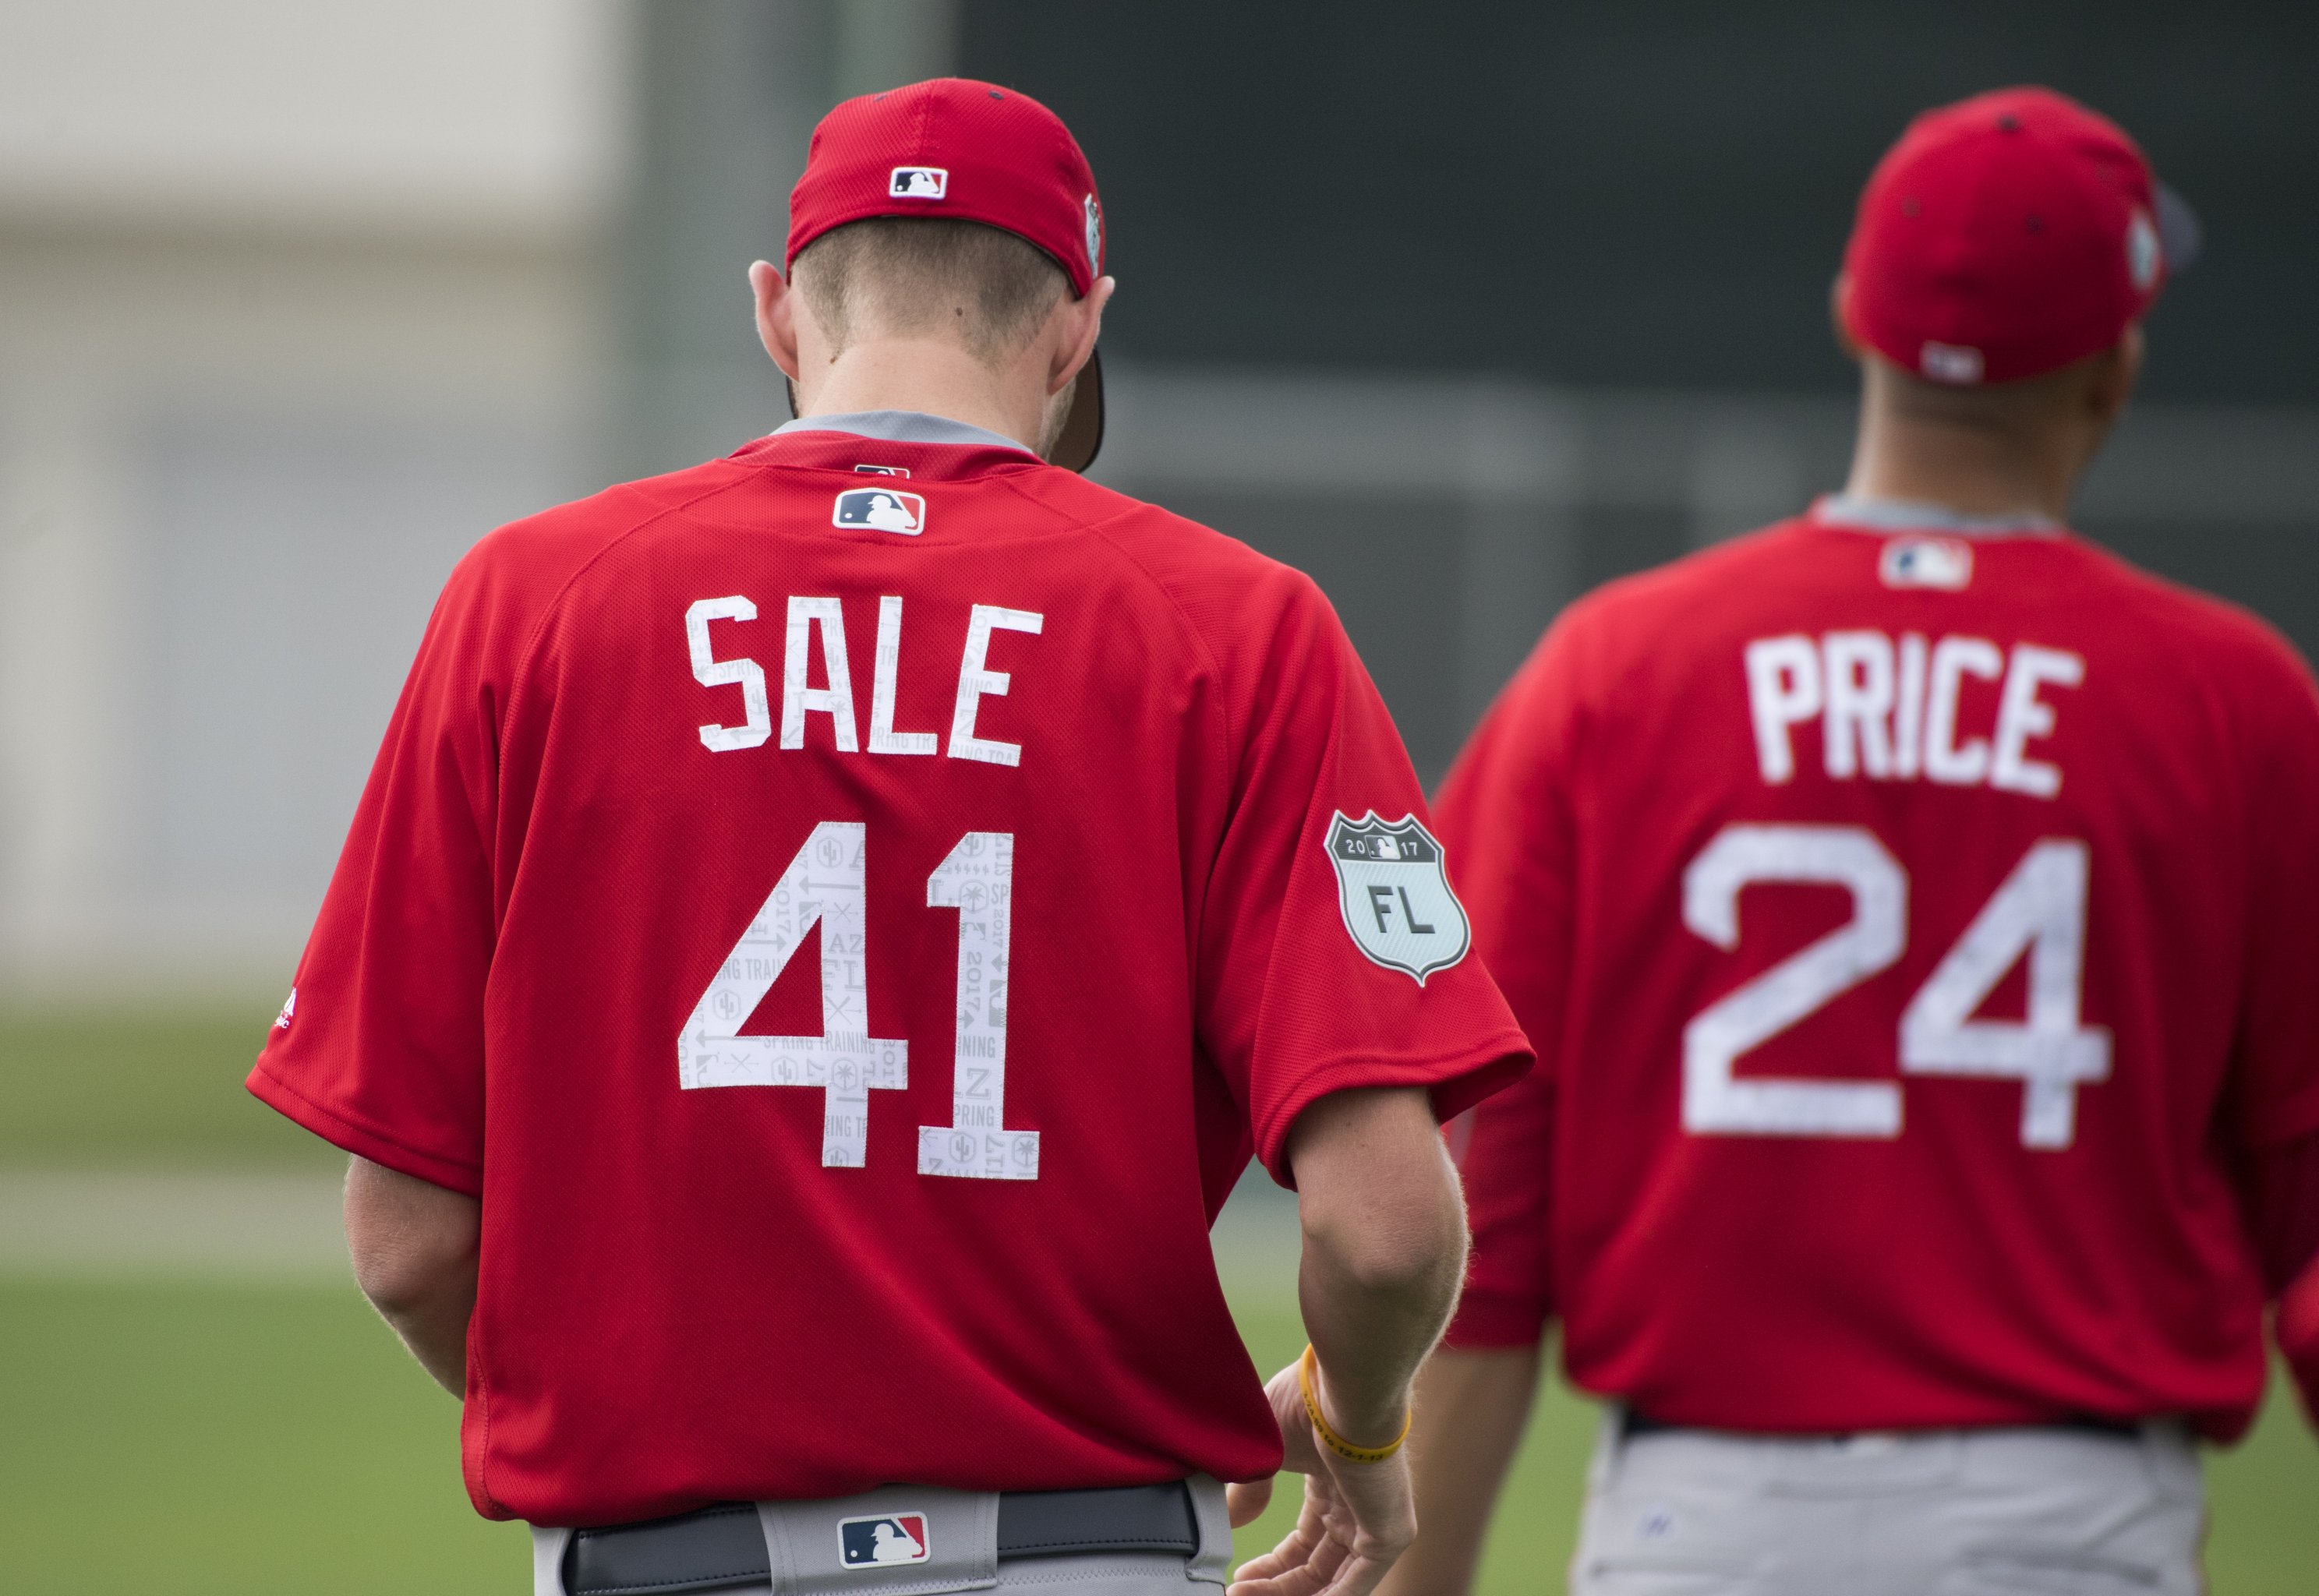 Chris Sale reportedly sent home over refusal to wear throwback uniforms